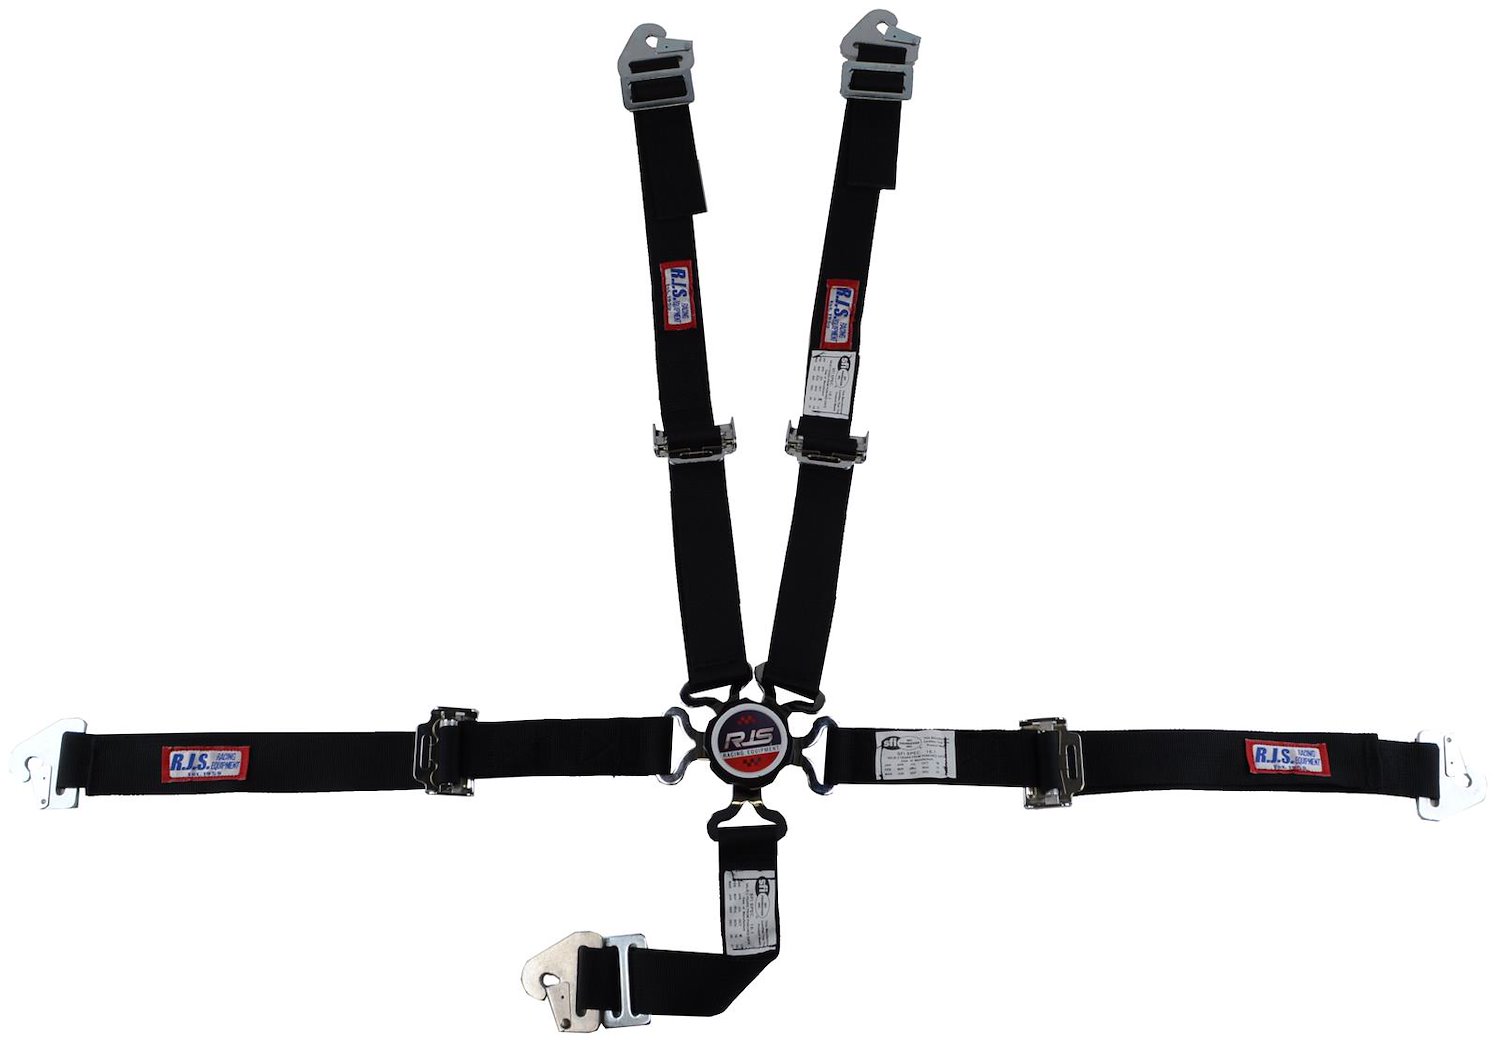 SFI 16.1 CAM-LOCK HARNESS 2 PULL UP Lap Belt 2 Shoulder Harness Individual ROLL BAR Mount 2 SINGLE Sub ALL WRAP ENDS RED